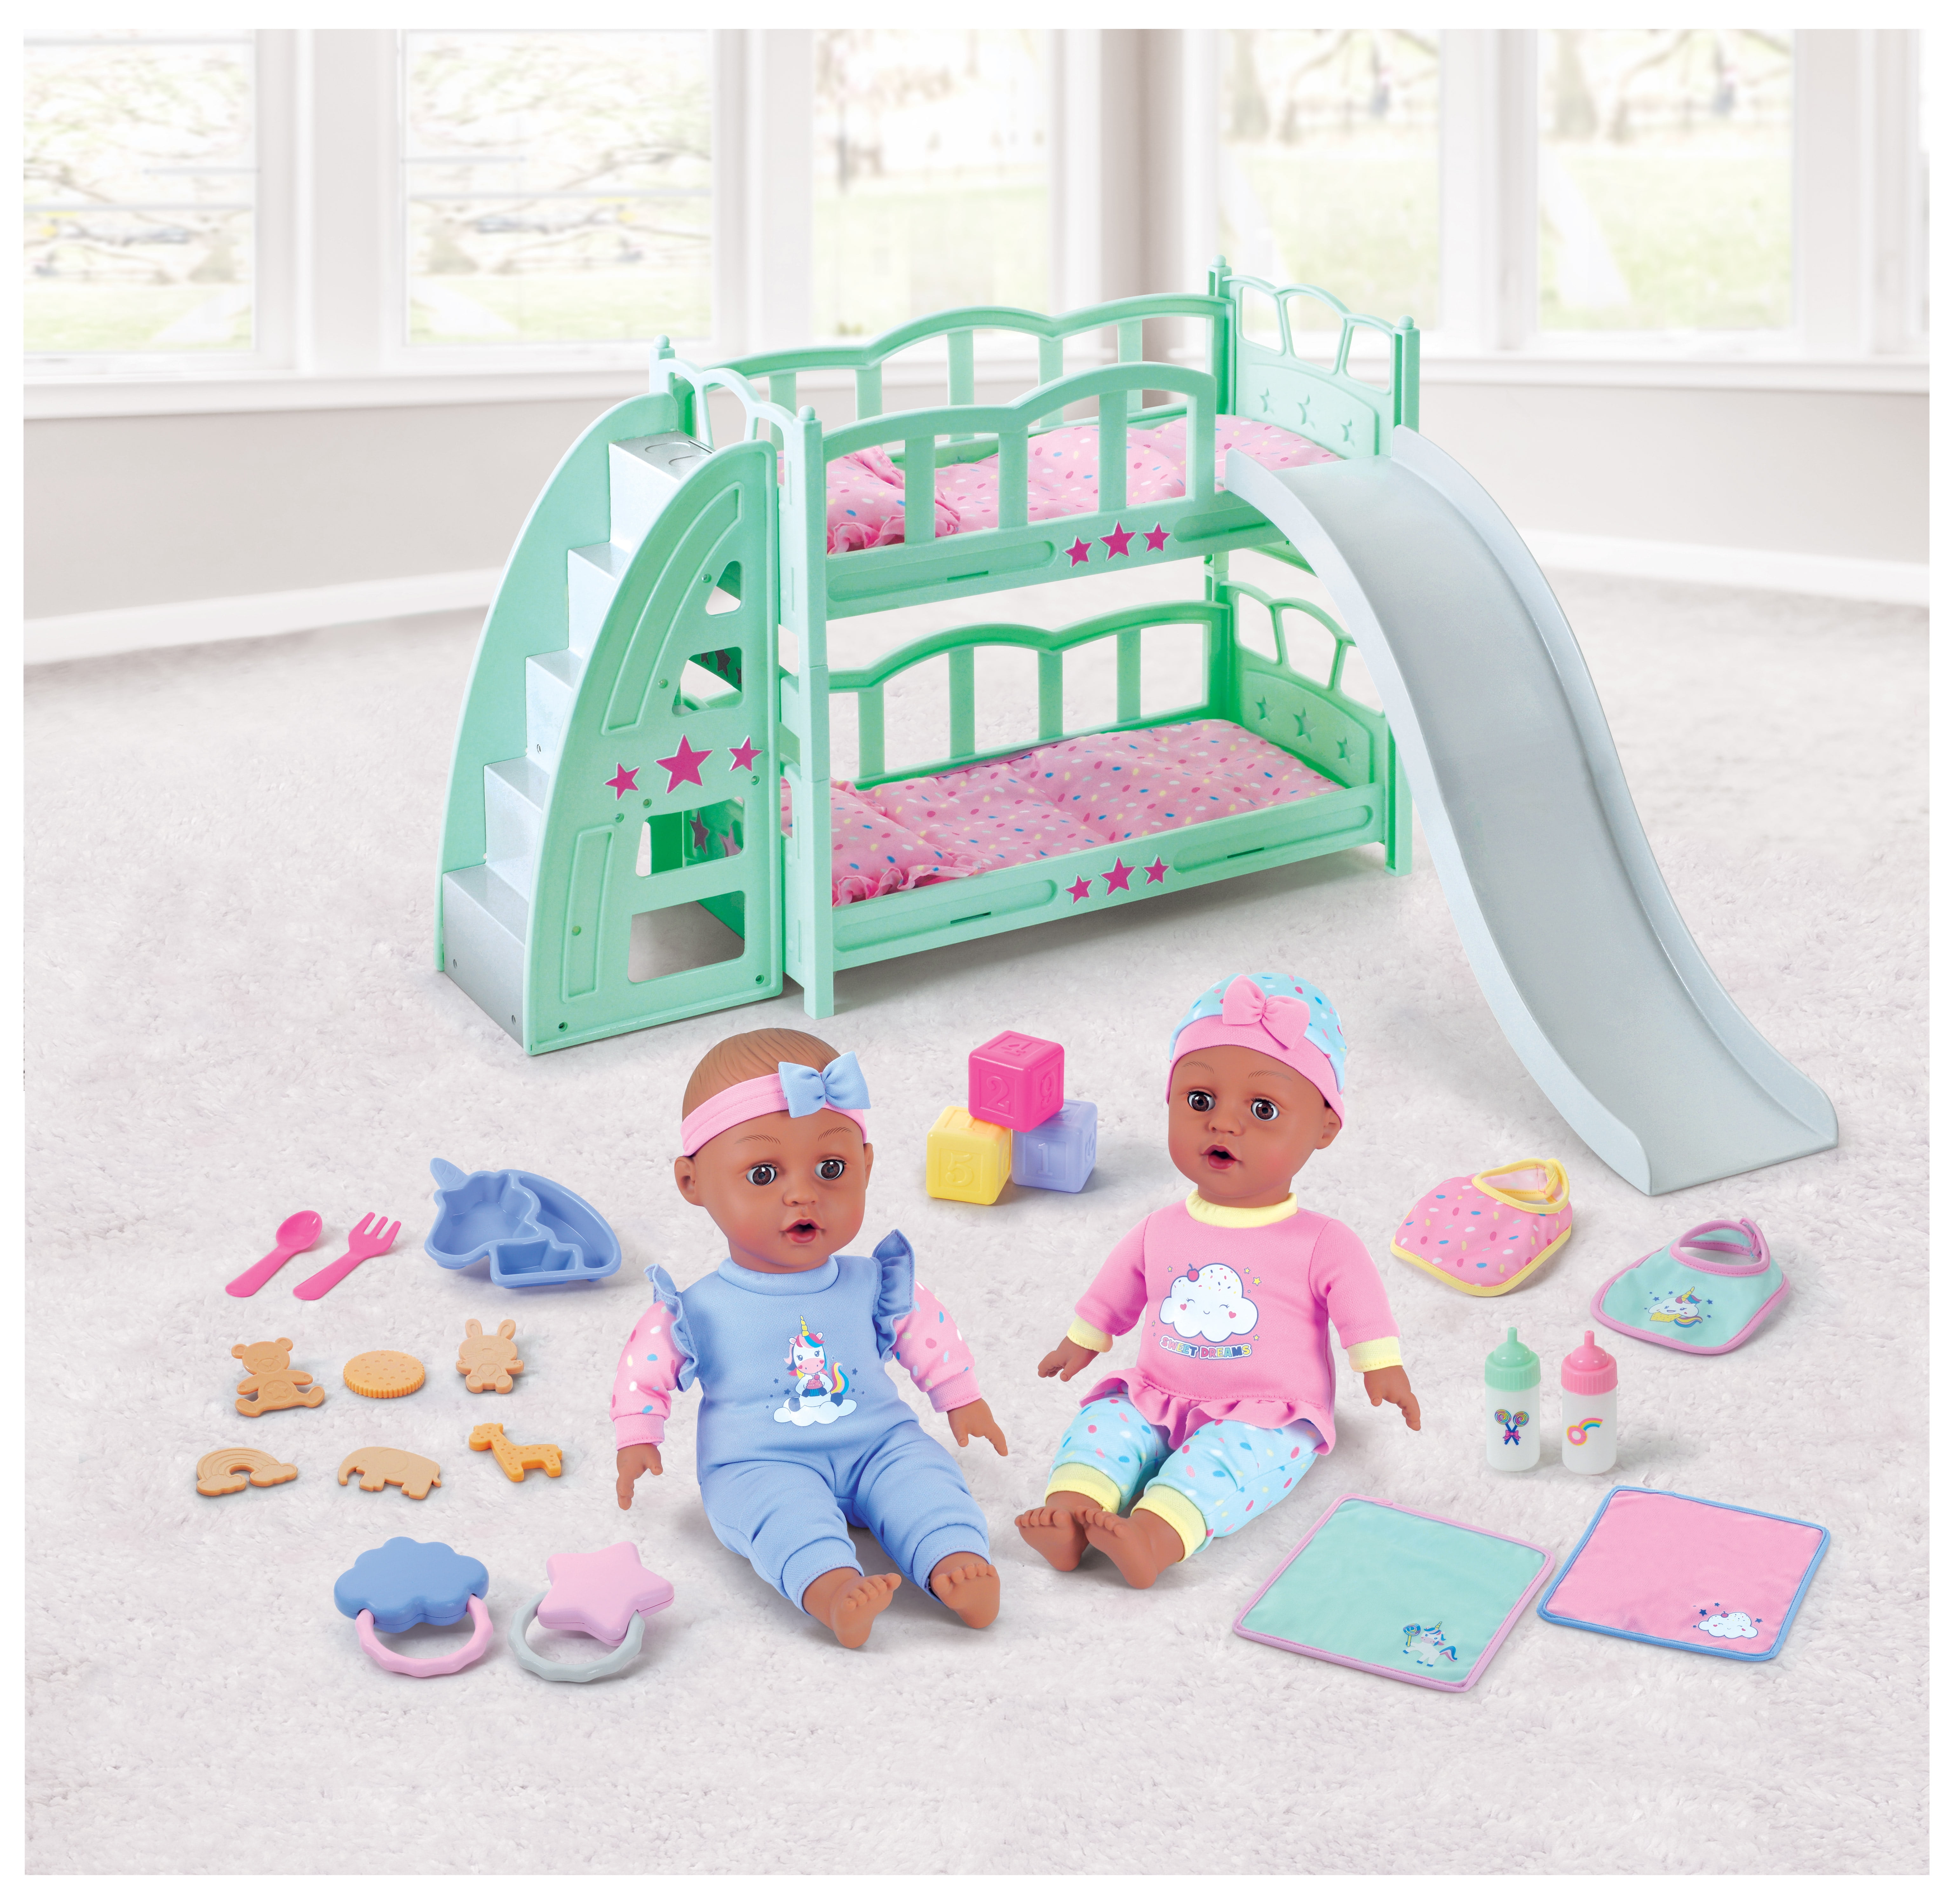 My Sweet Love Deluxe Bunk Bed African, Bunk Beds For Baby Alive